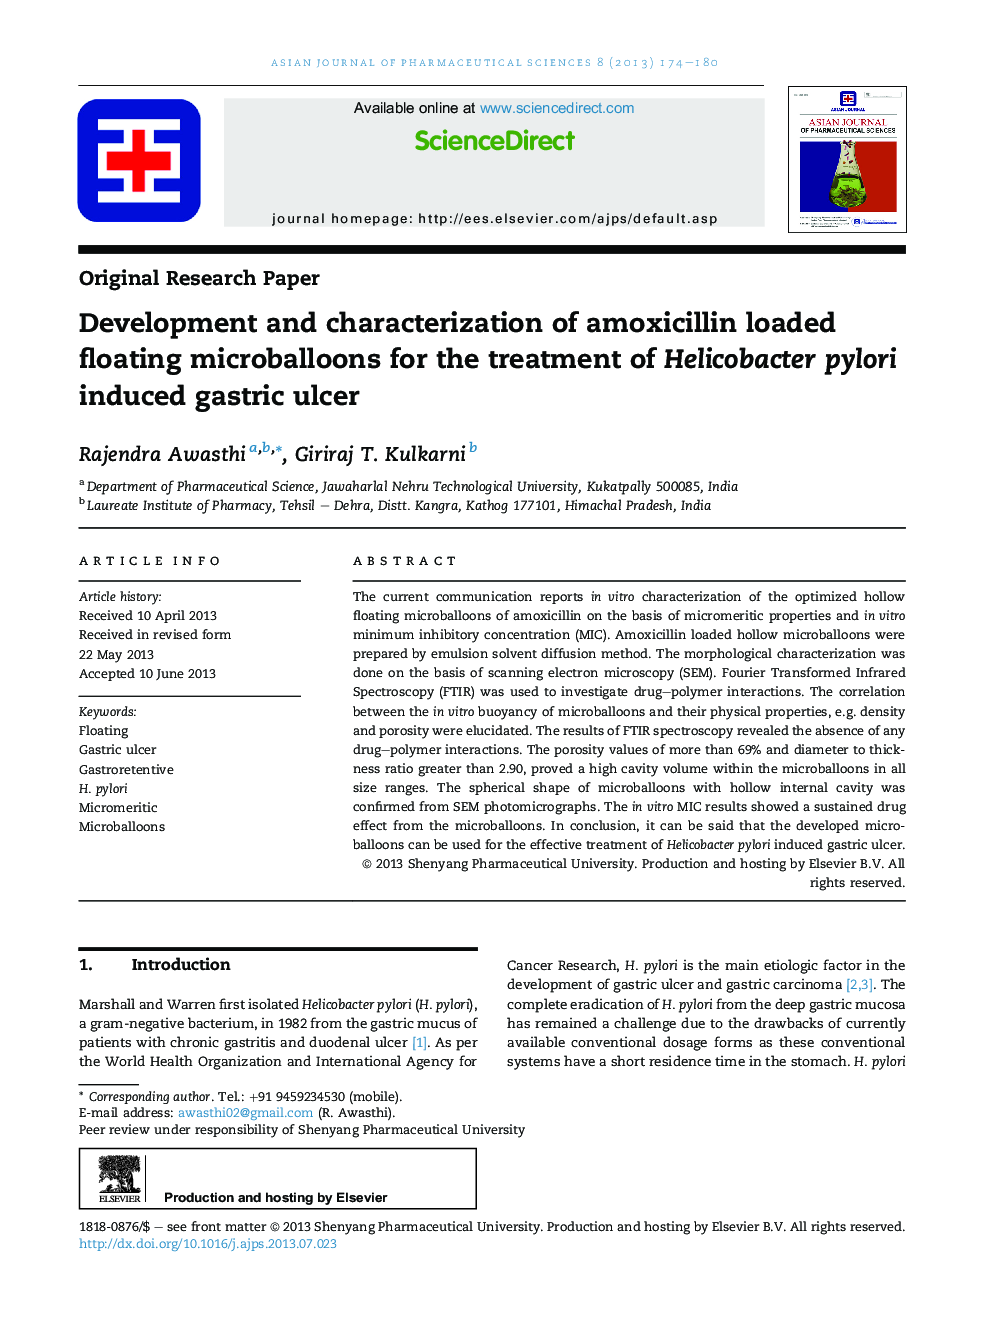 Development and characterization of amoxicillin loaded floating microballoons for the treatment of Helicobacter pylori induced gastric ulcer 